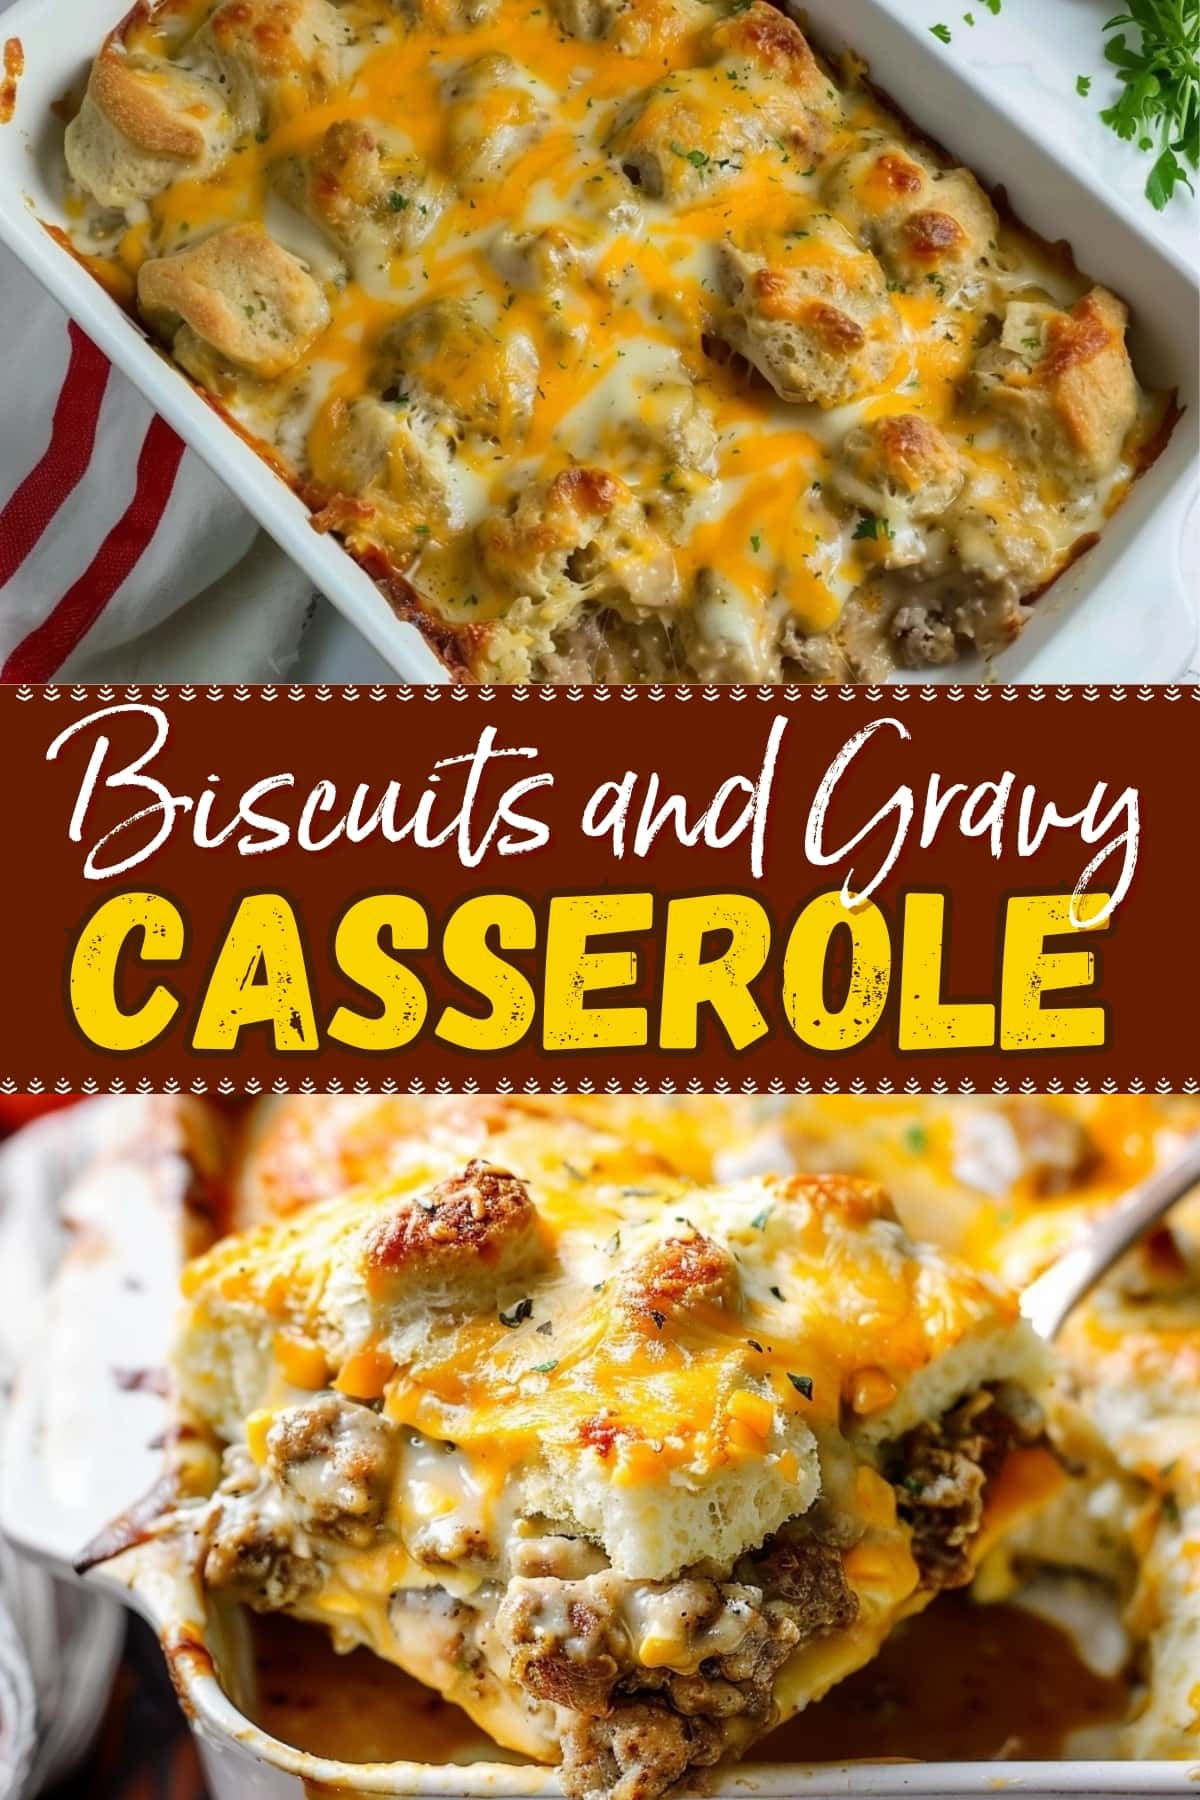 Biscuits and gravy casserole.